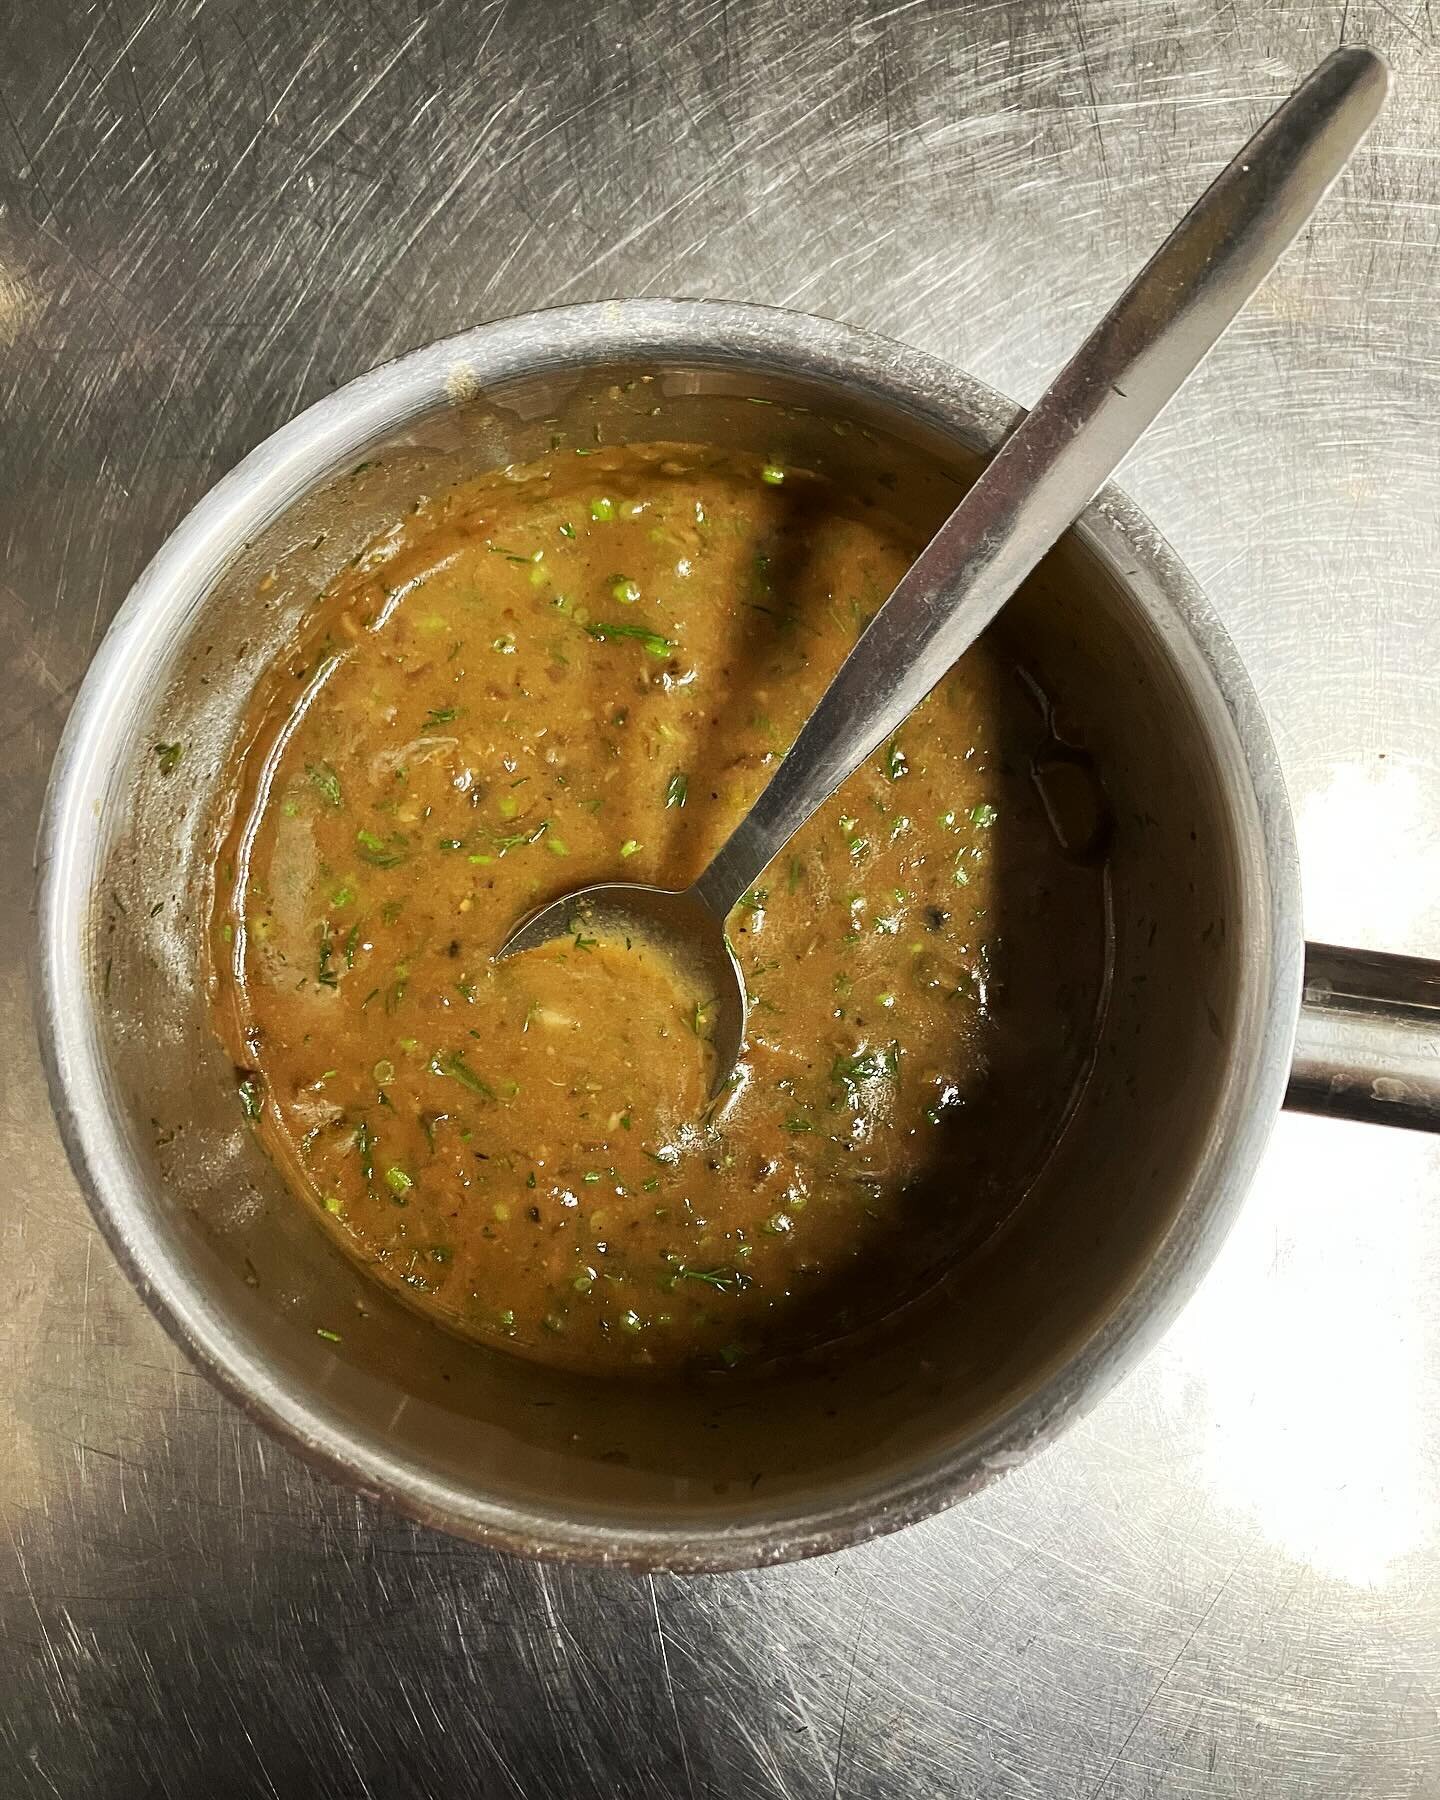 WOW WOW Sauce created by William Kitchiner from his book The Cook&rsquo;s Oracle in 1817. Our version has Beef Stock, Horseradish, Gherkins, Pickled Walnuts, Capers, Brown Mustard, Onions, Brown Ale, Dill and on today with some stunning Aged Rump Cap